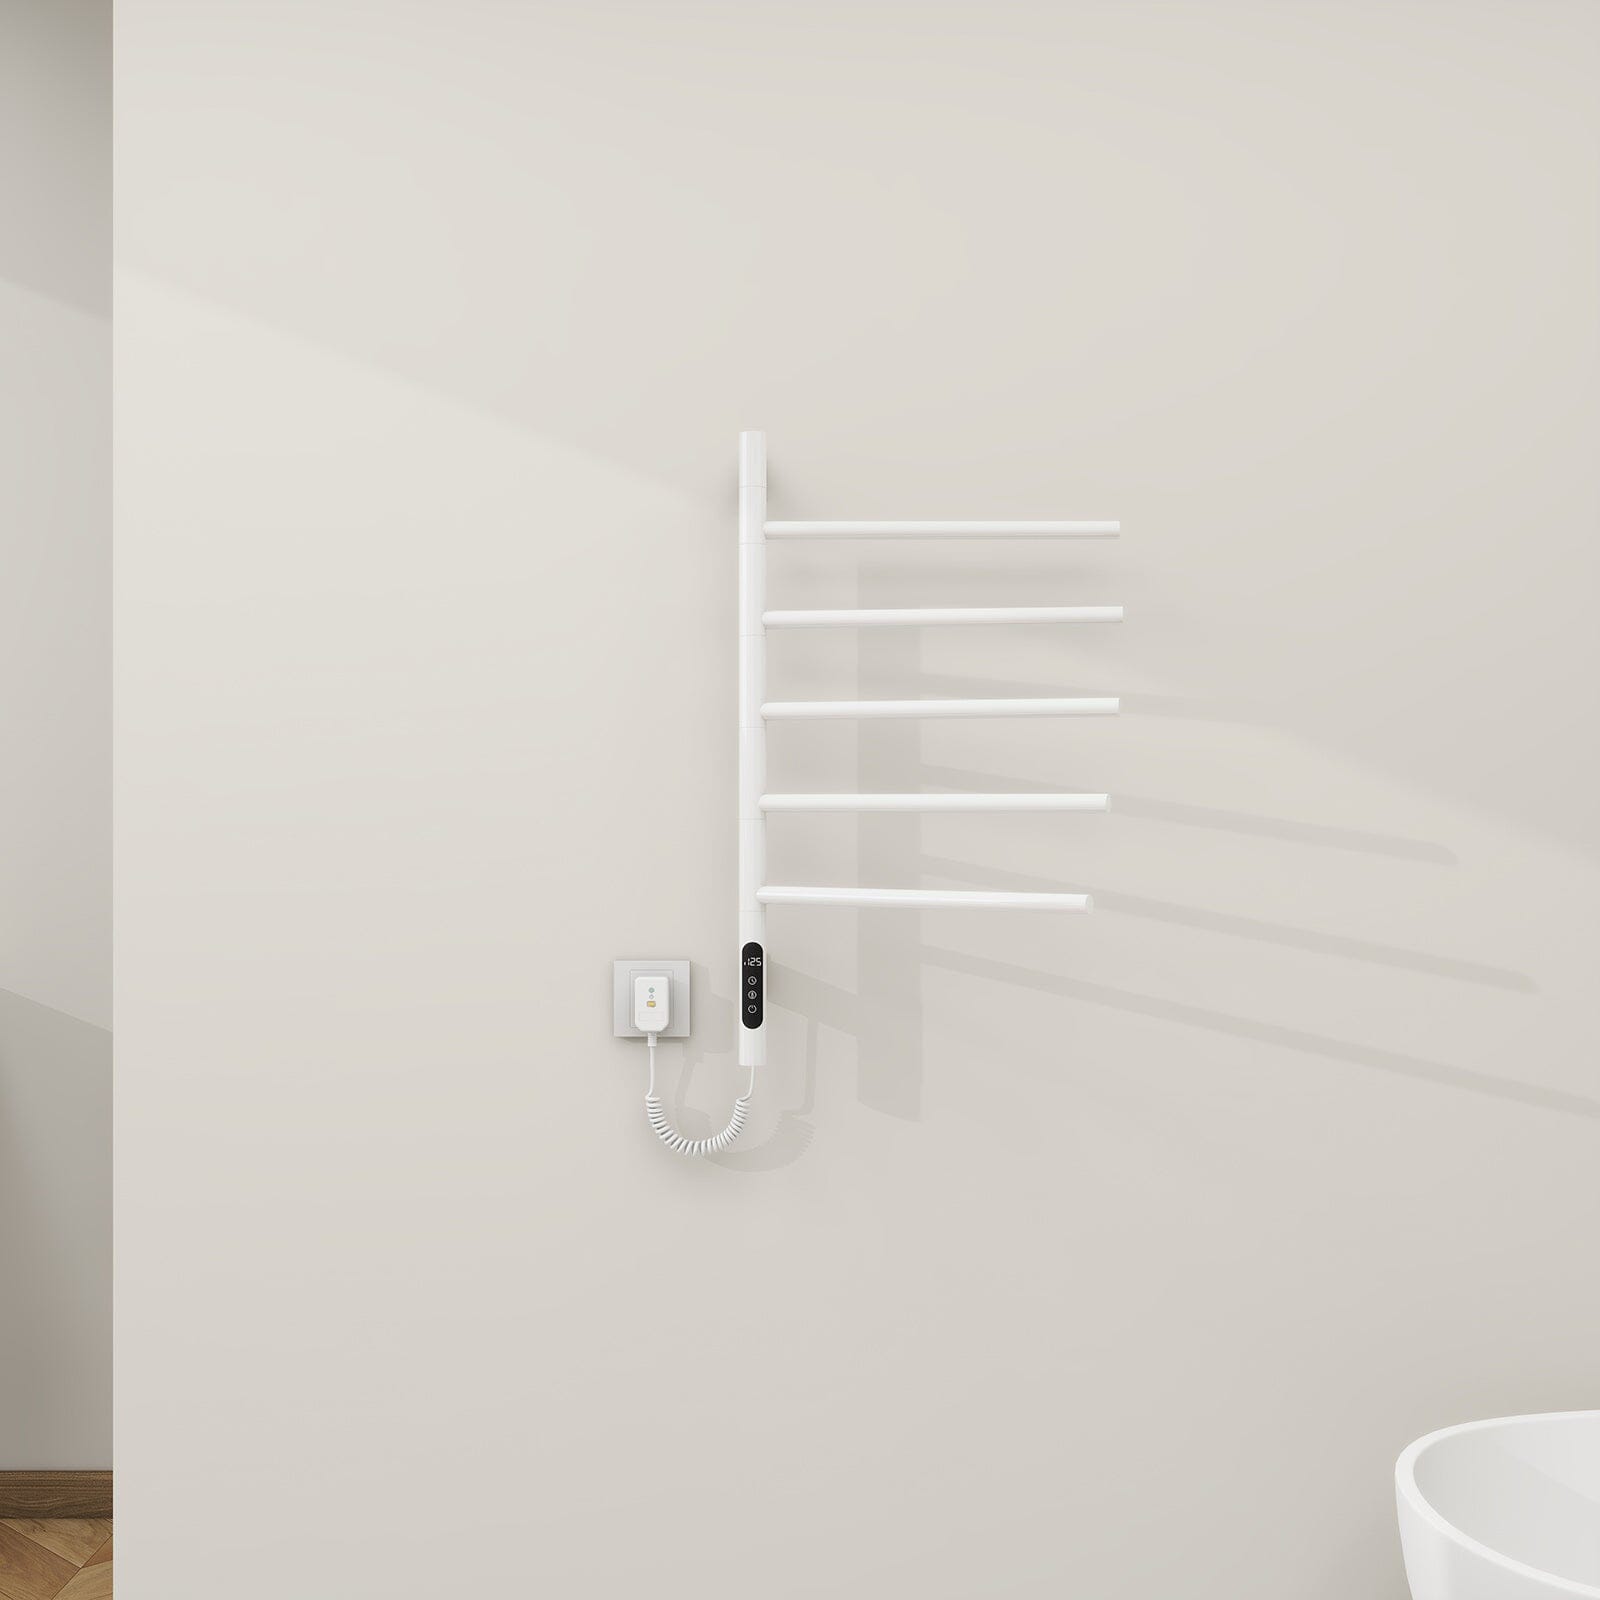 Heated Towel Racks for Bathroom, 180° Rotating Wall Mounted Towel Warmer with Built-in Timer